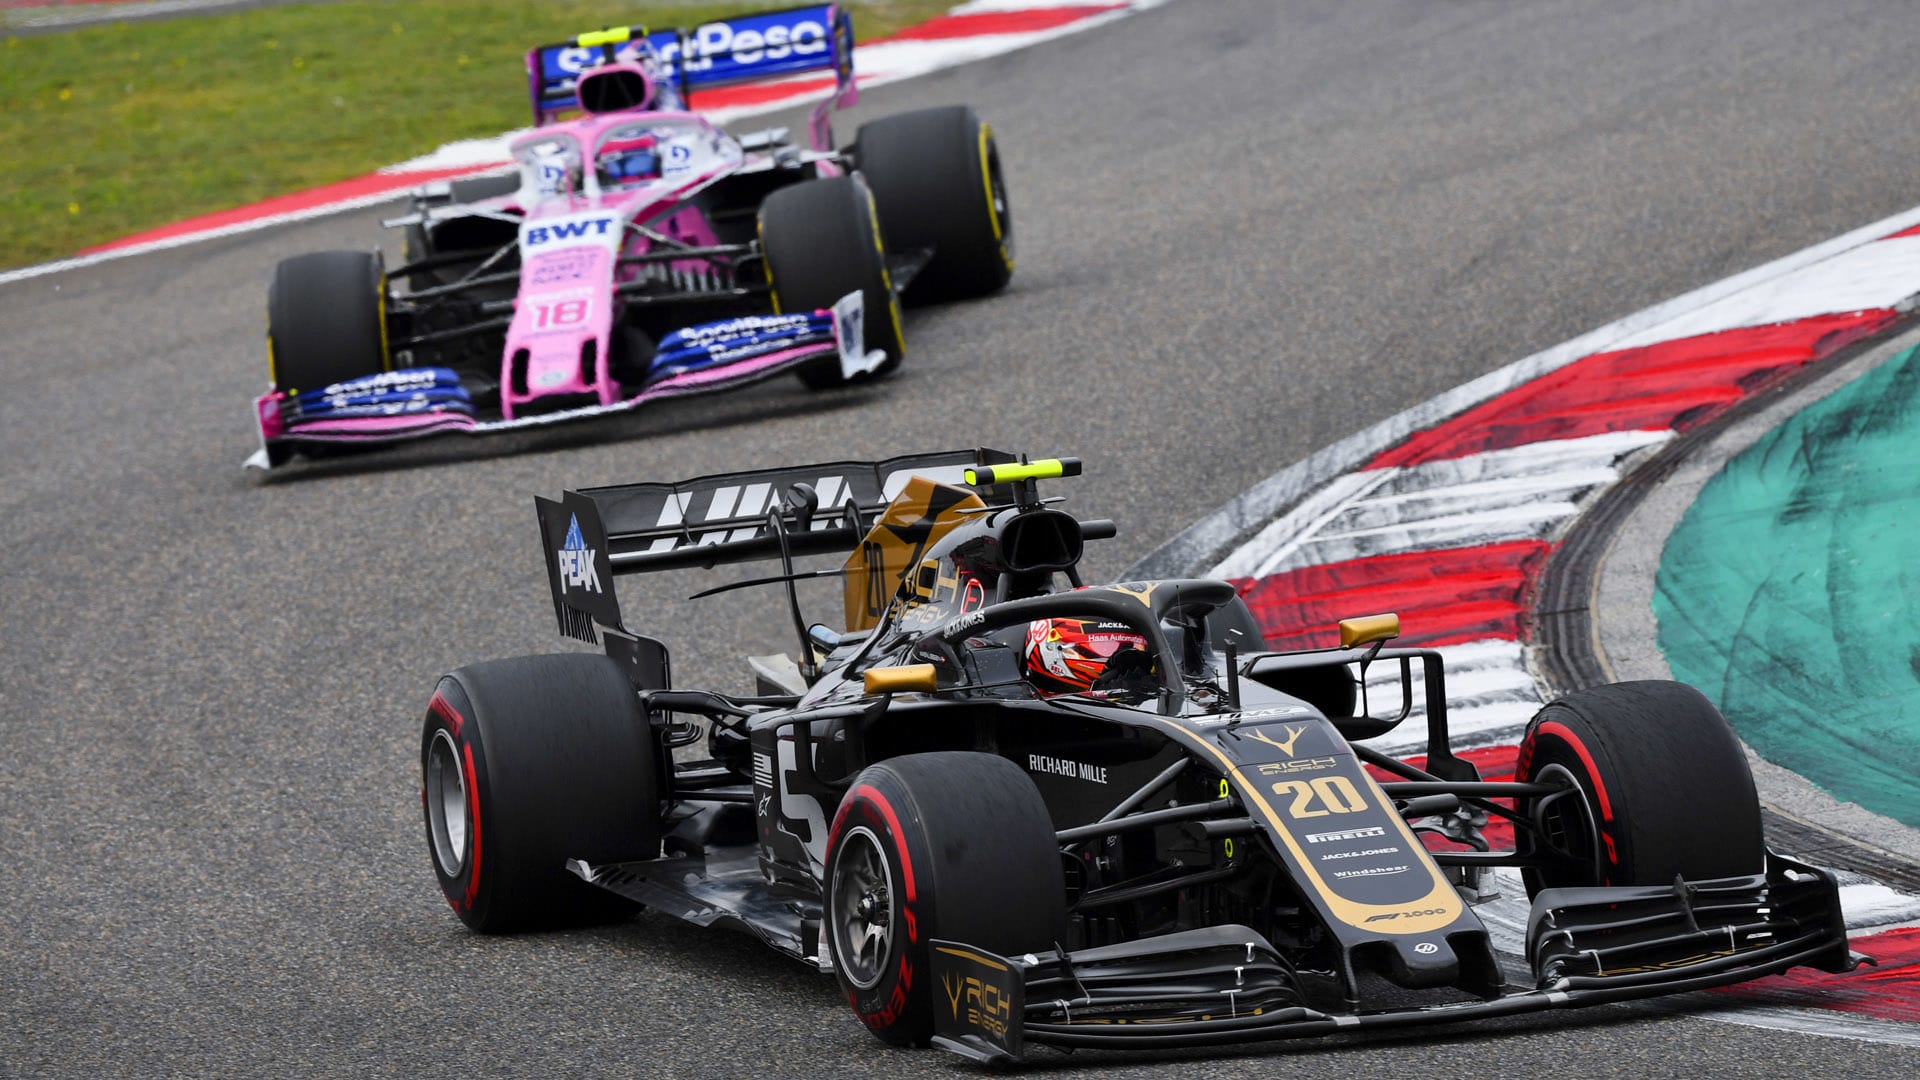 F1 Fantasy What were the best and worst teams for the 2019 Spanish